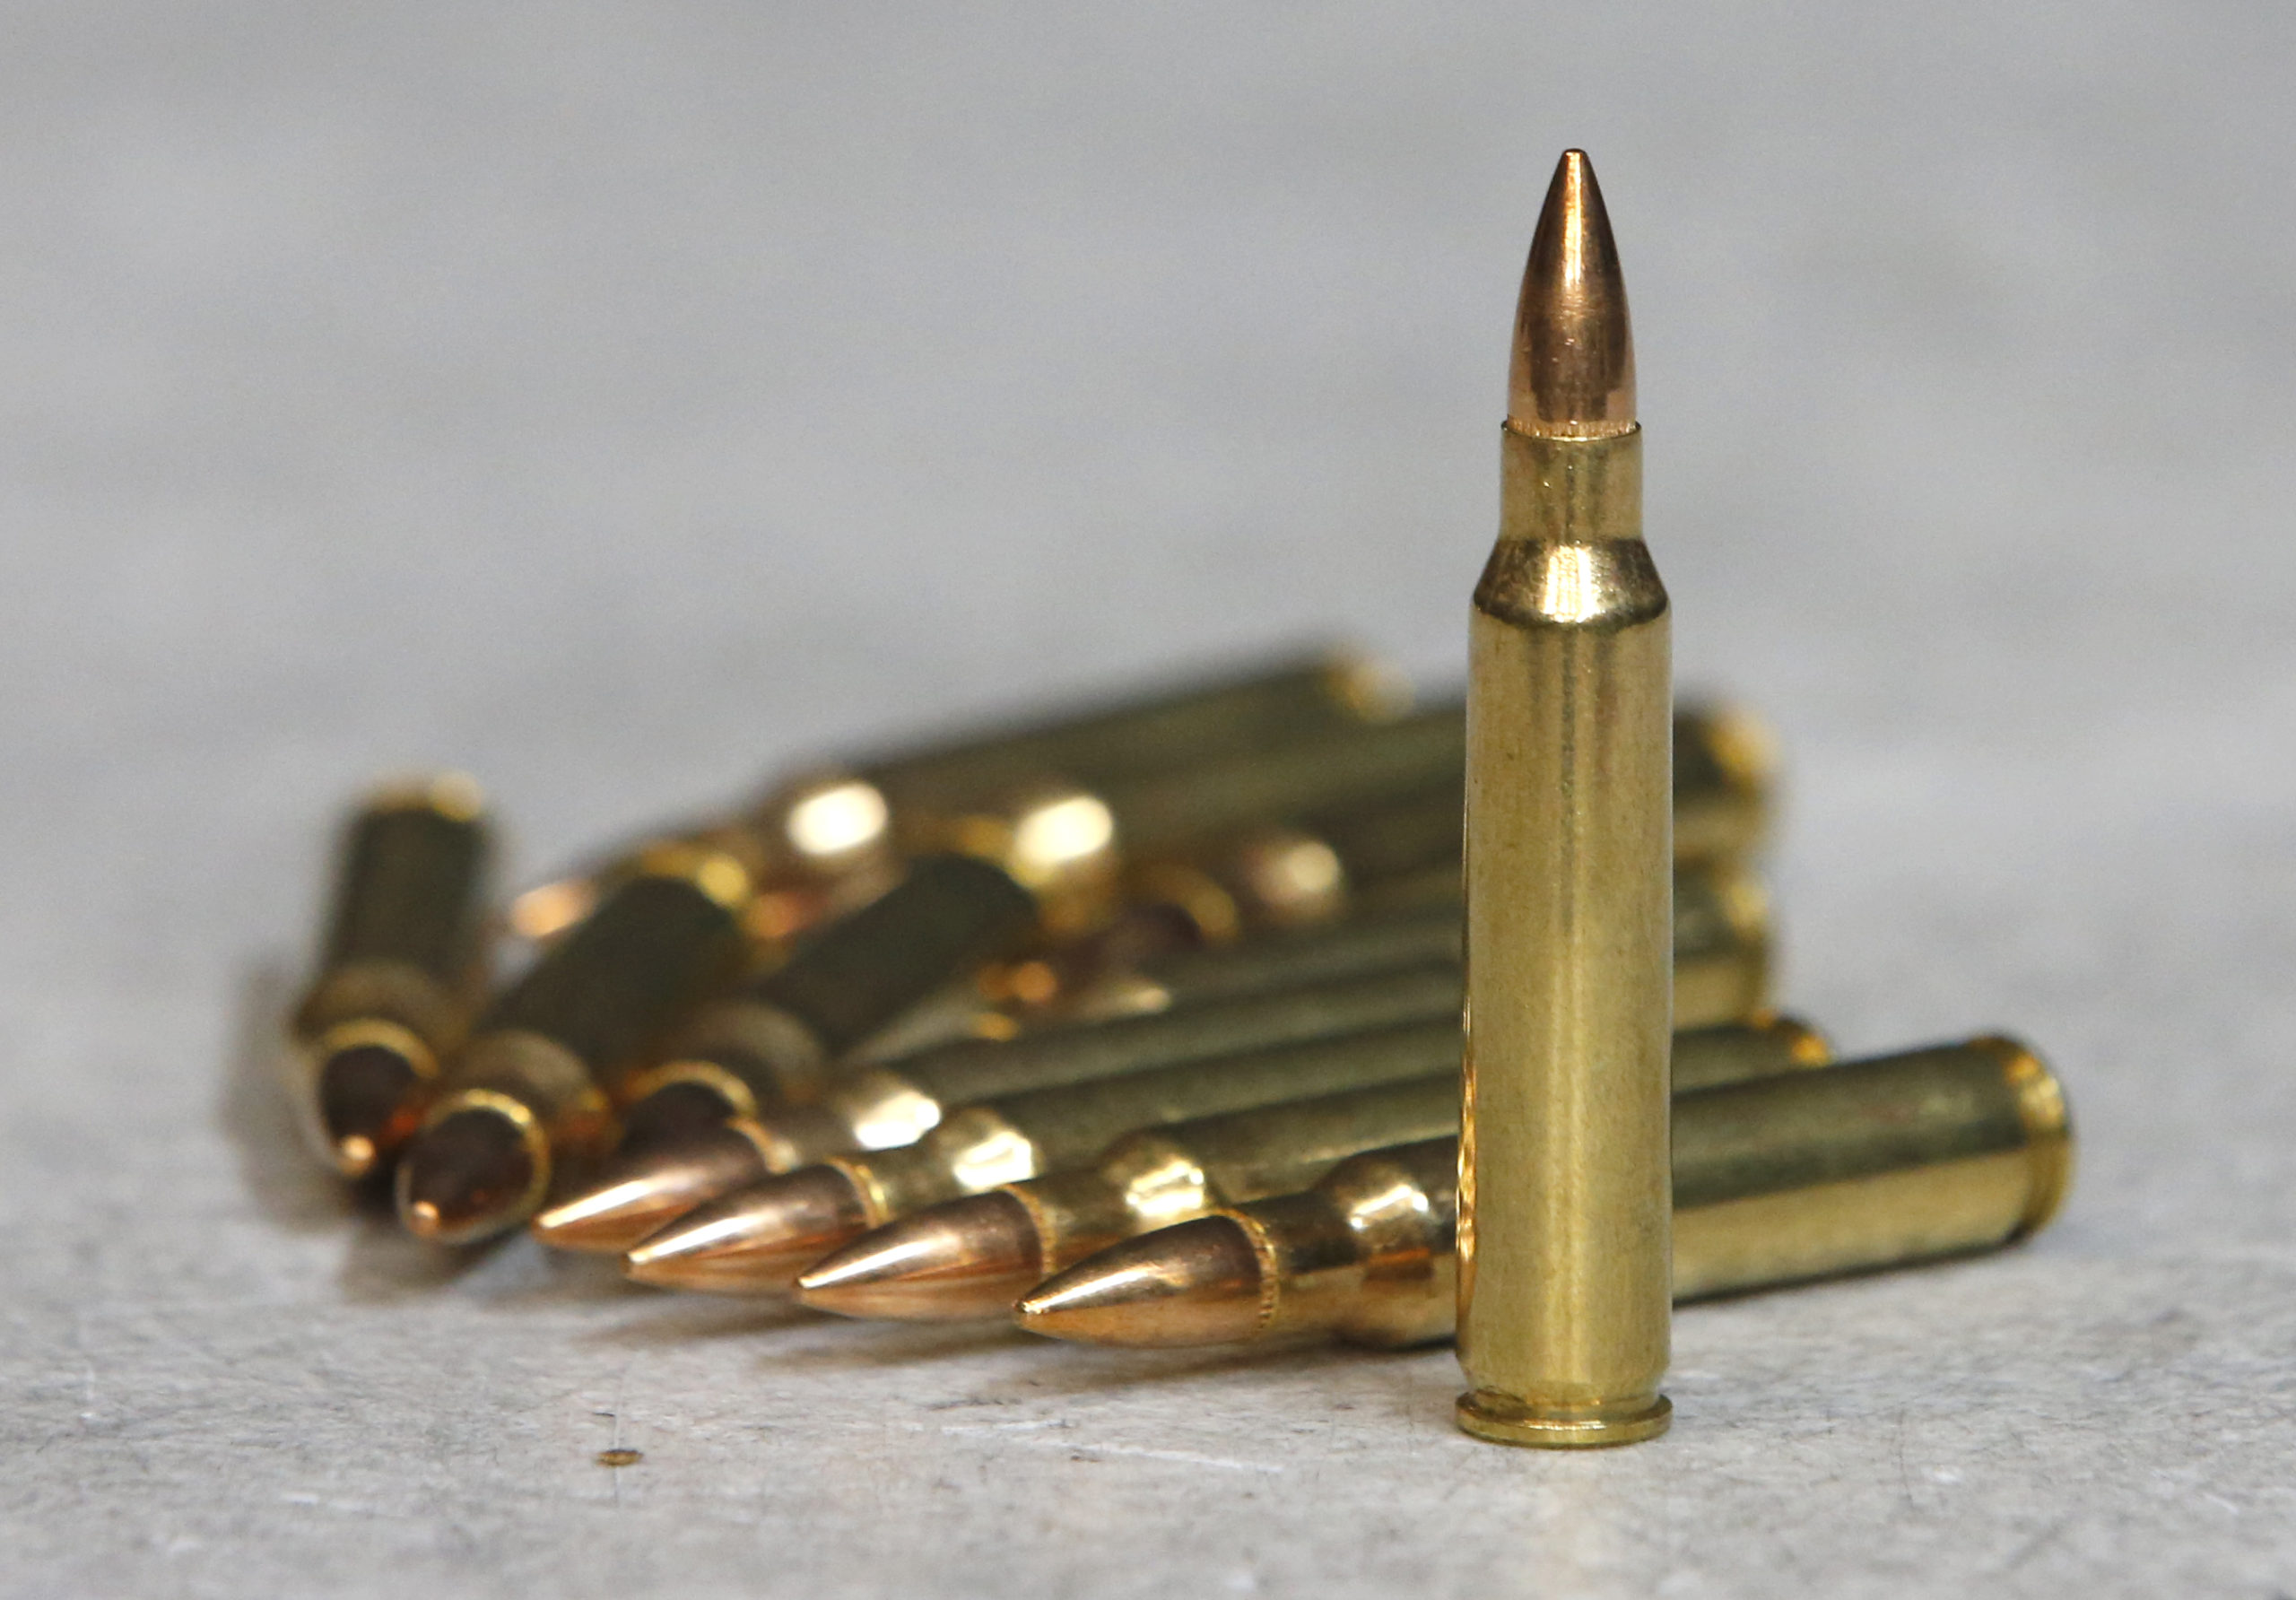 SPRINGVILLE, UT - JUNE 17: This is 223 ammunition for an AR-15 semi-automatic gun at Action Target on June 17, 2016 in Springville, Utah. Semi-automatics are in the news again after the nightclub shooting in Orlando F;lord last week. (Photo by George Frey/Getty Images)